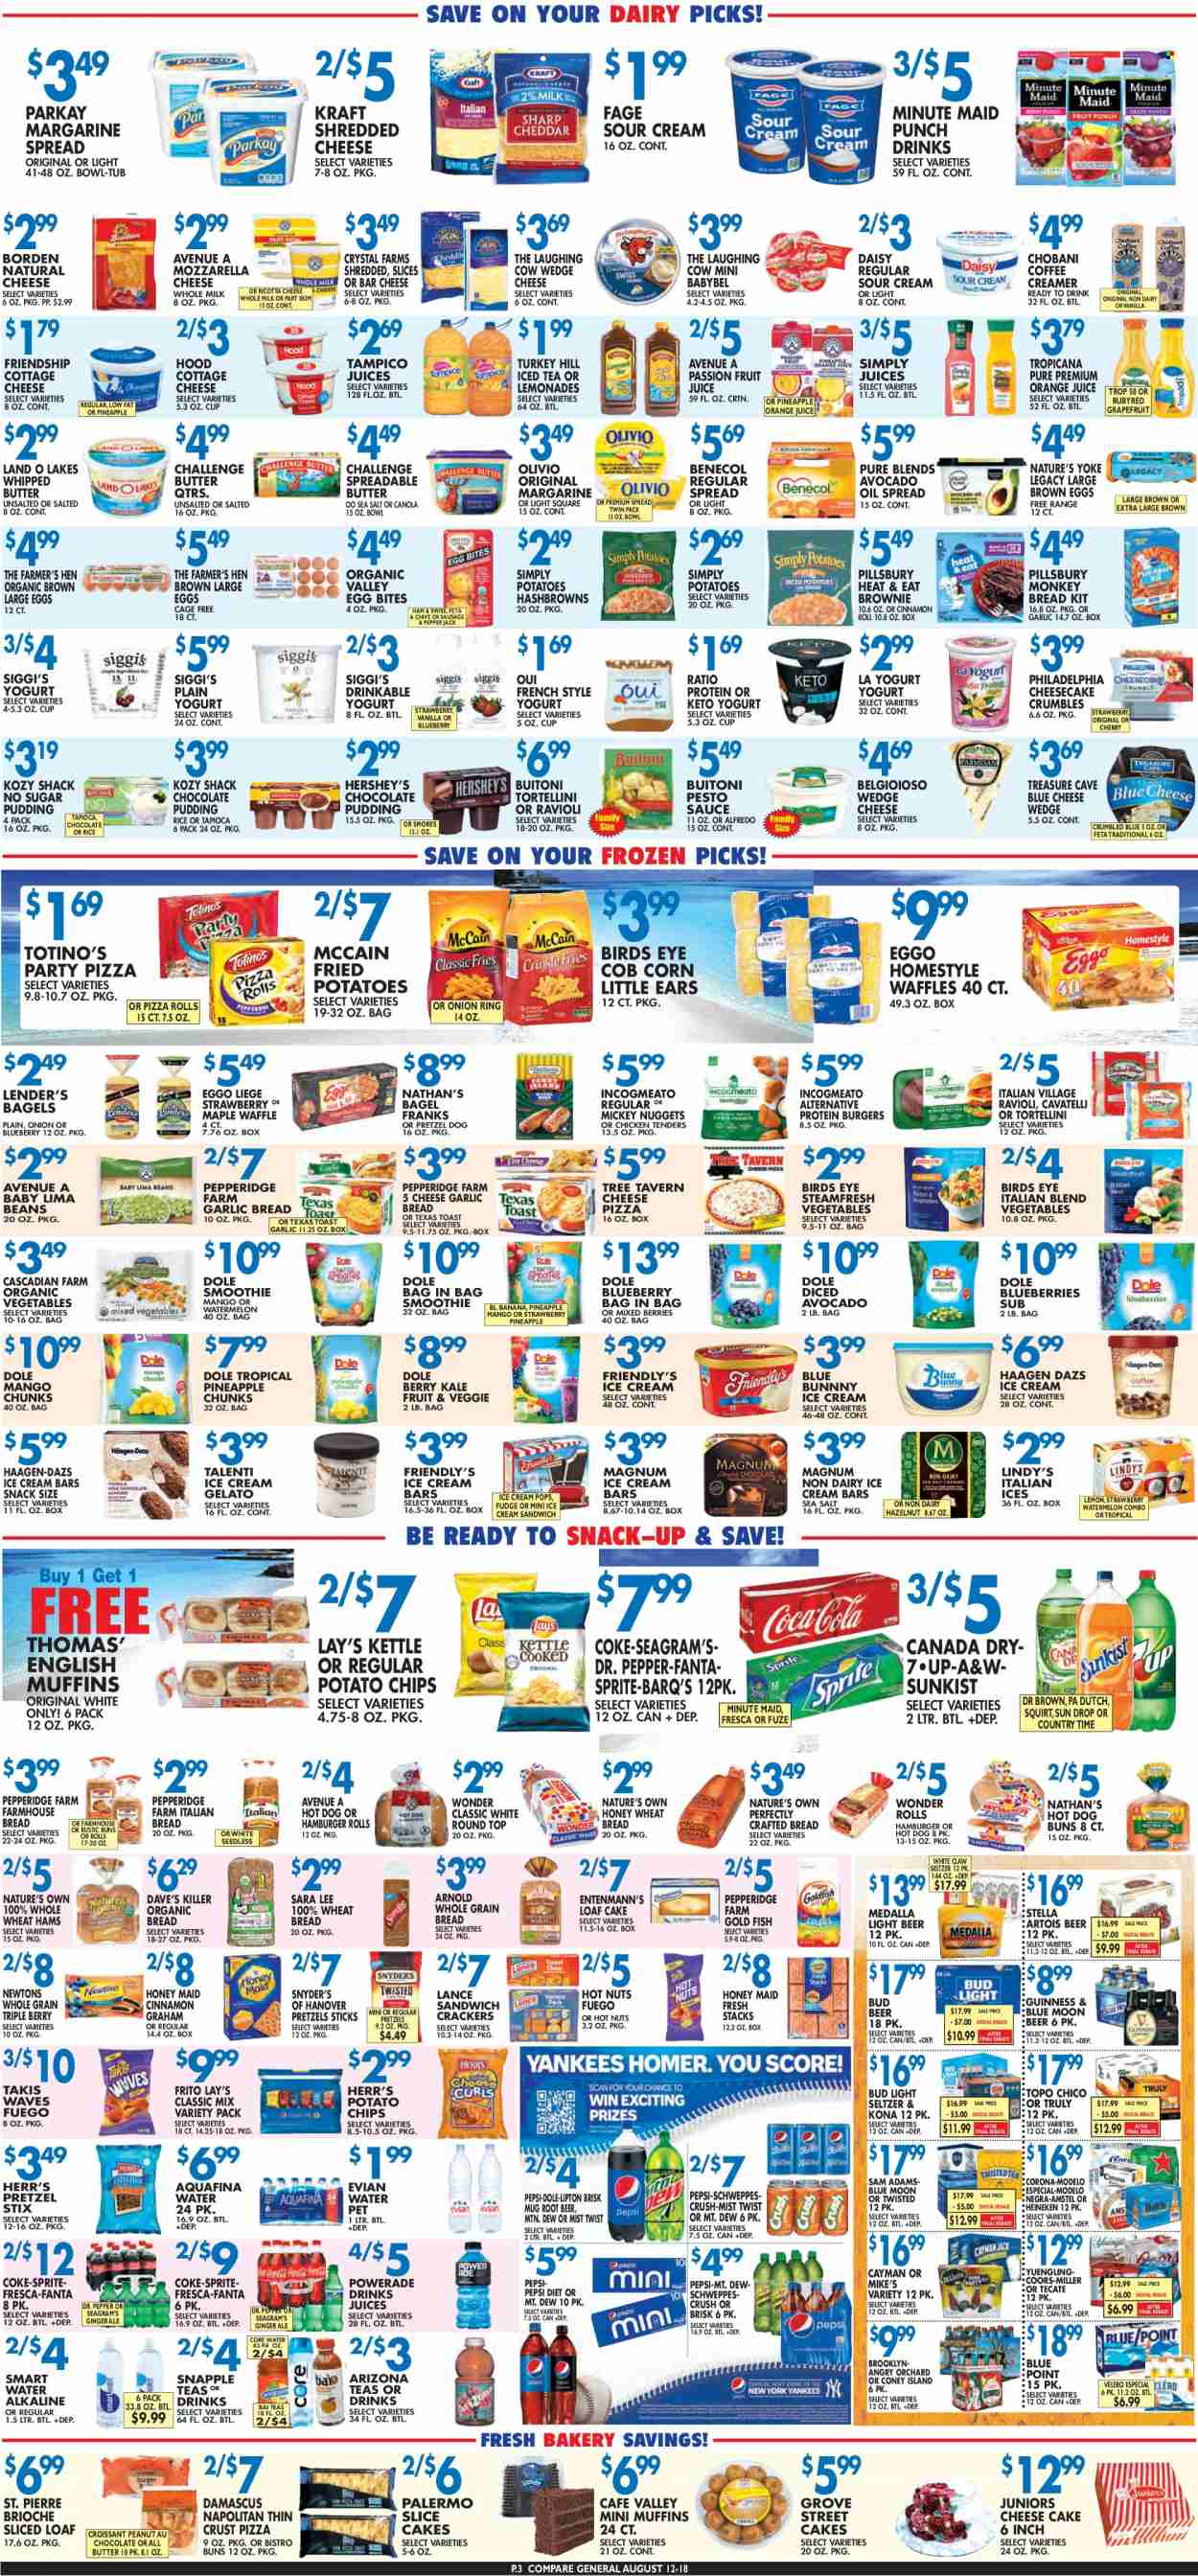 Compare Foods ad  - 08.12.2022 - 08.18.2022.